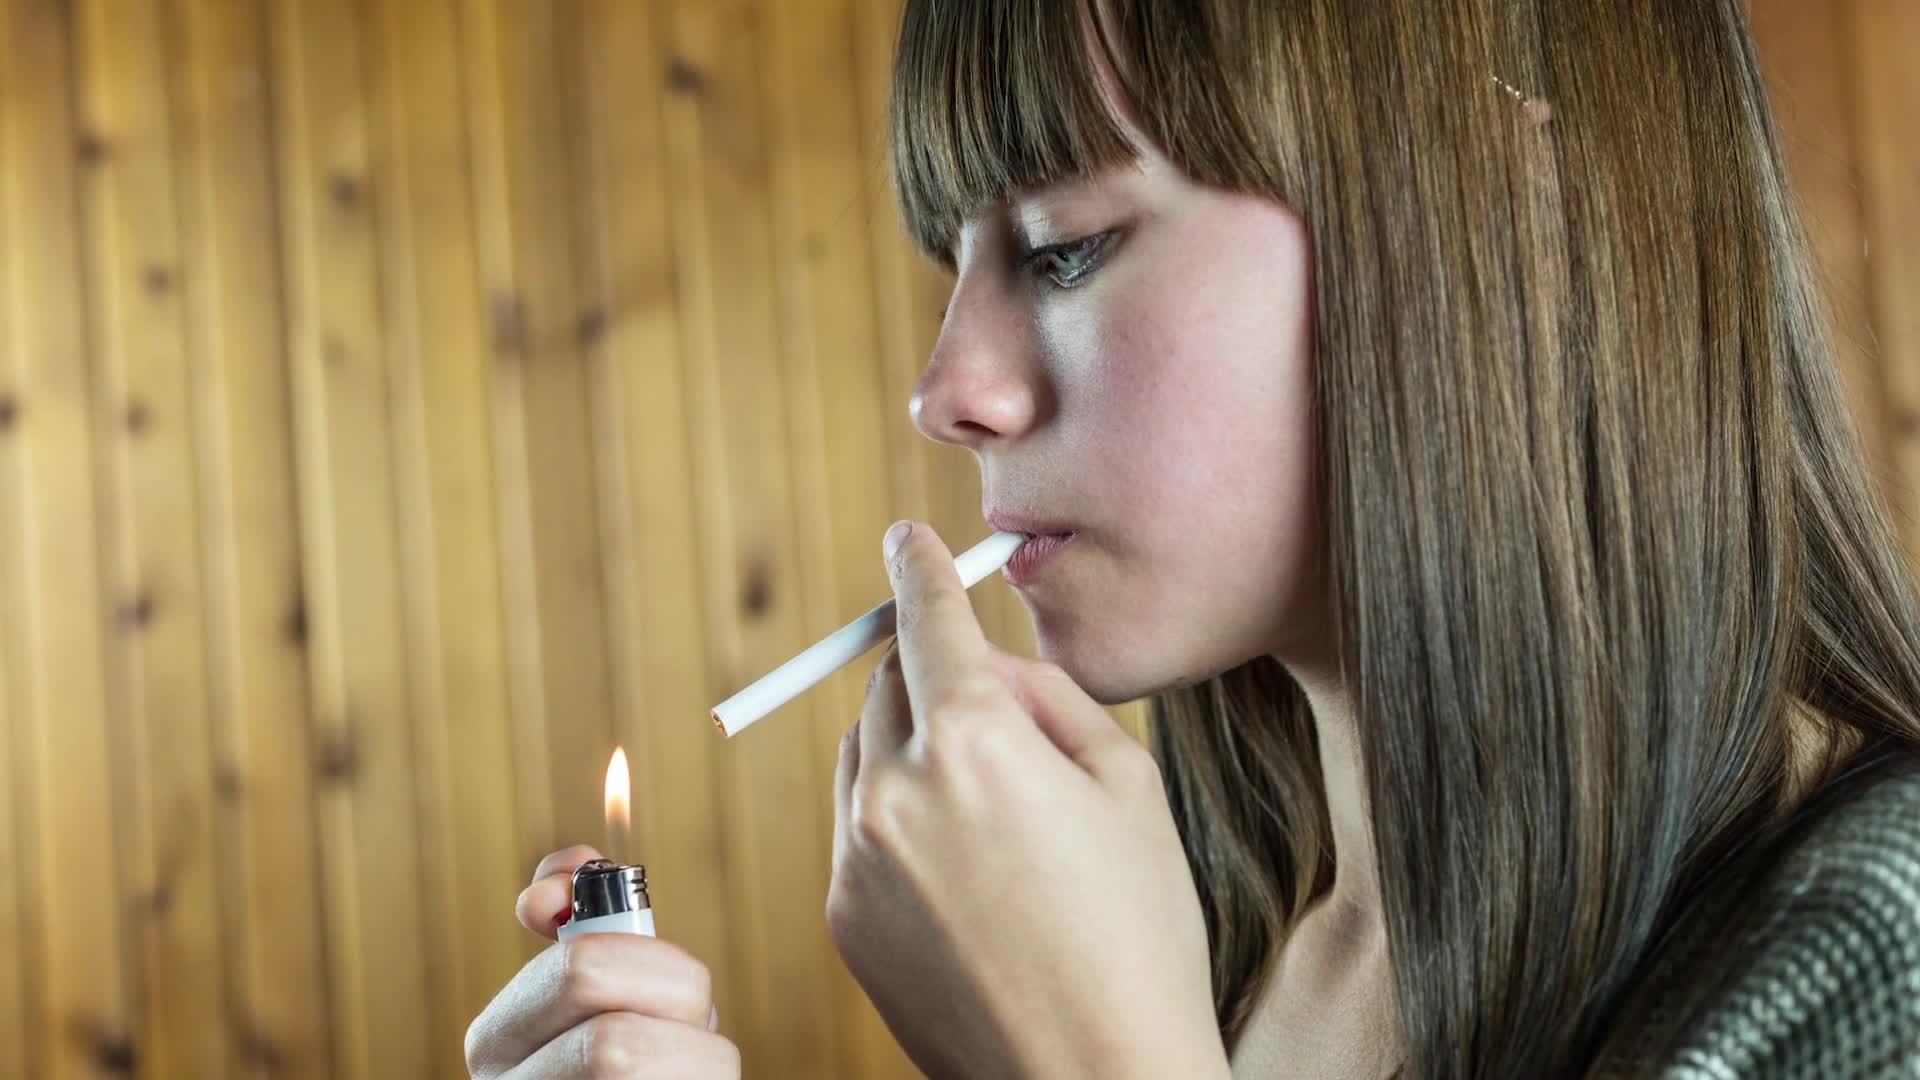 Start Smart: The Dangers of Smoking and Vaping